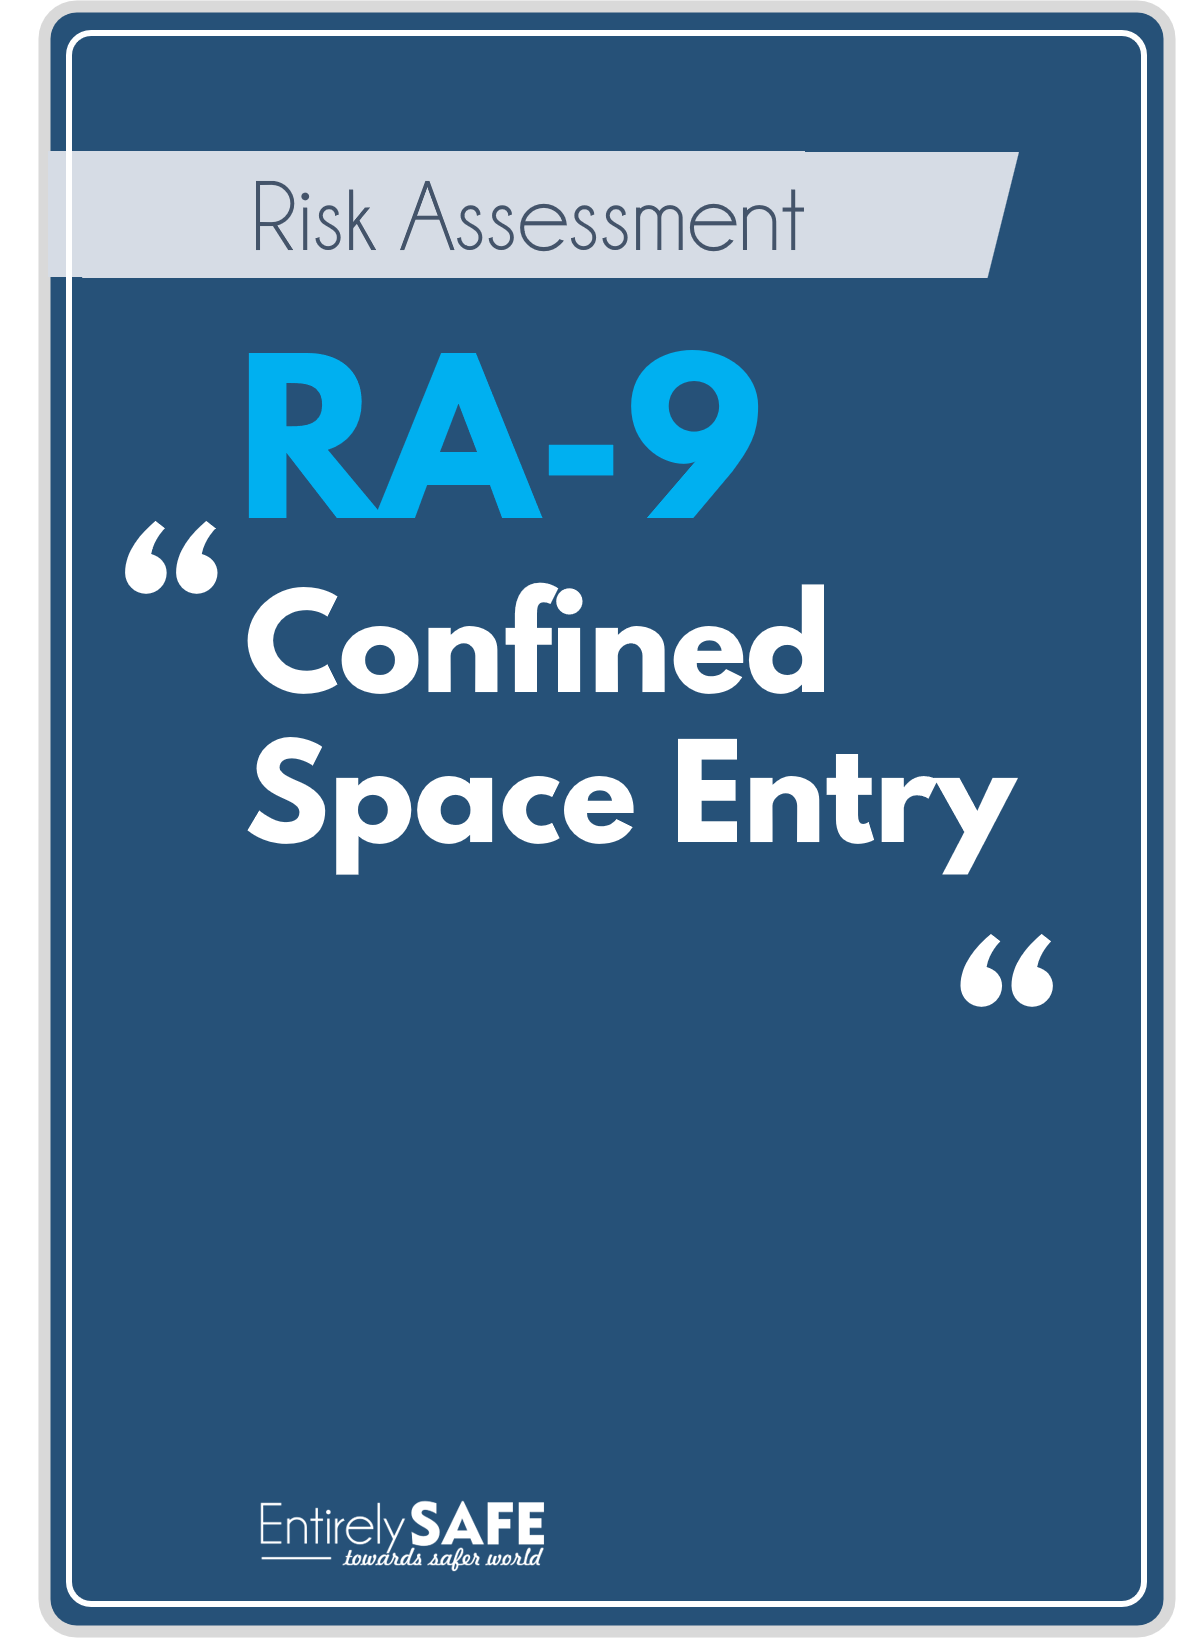 RA-9-Confined-Space-Entry